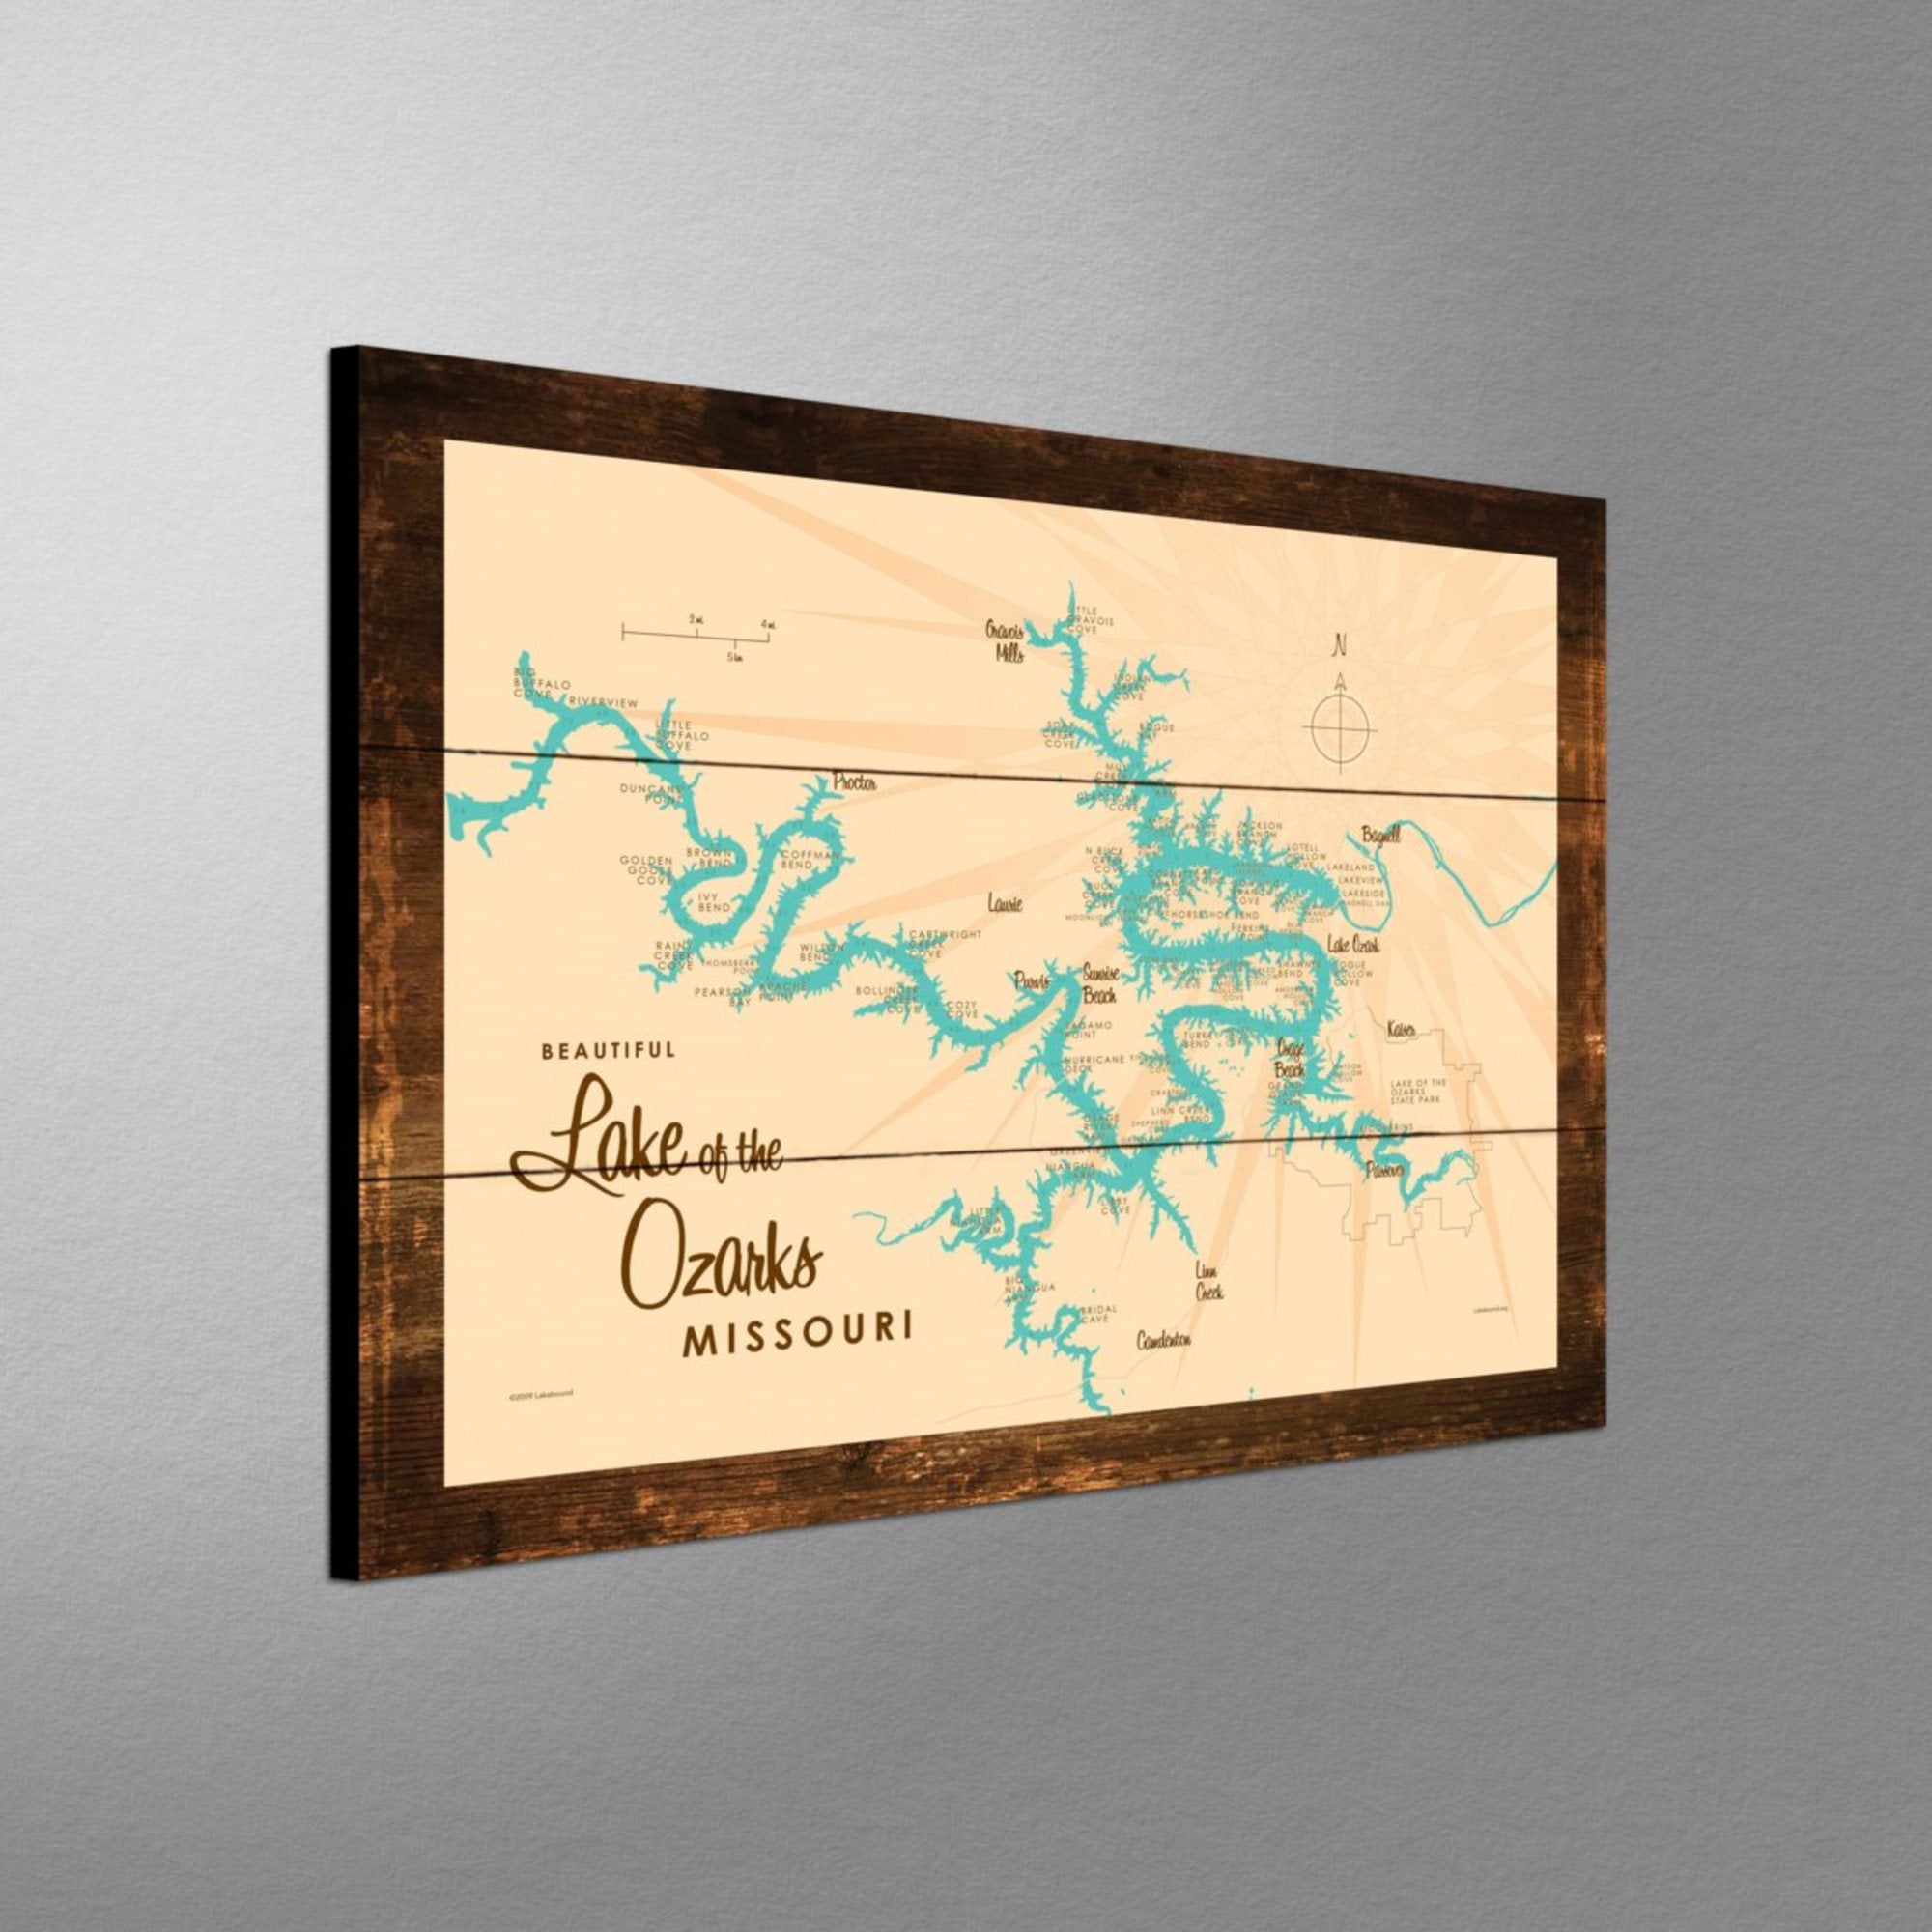 Lake of the Ozarks Missouri (with Mile Markers), Rustic Wood Sign Map Art